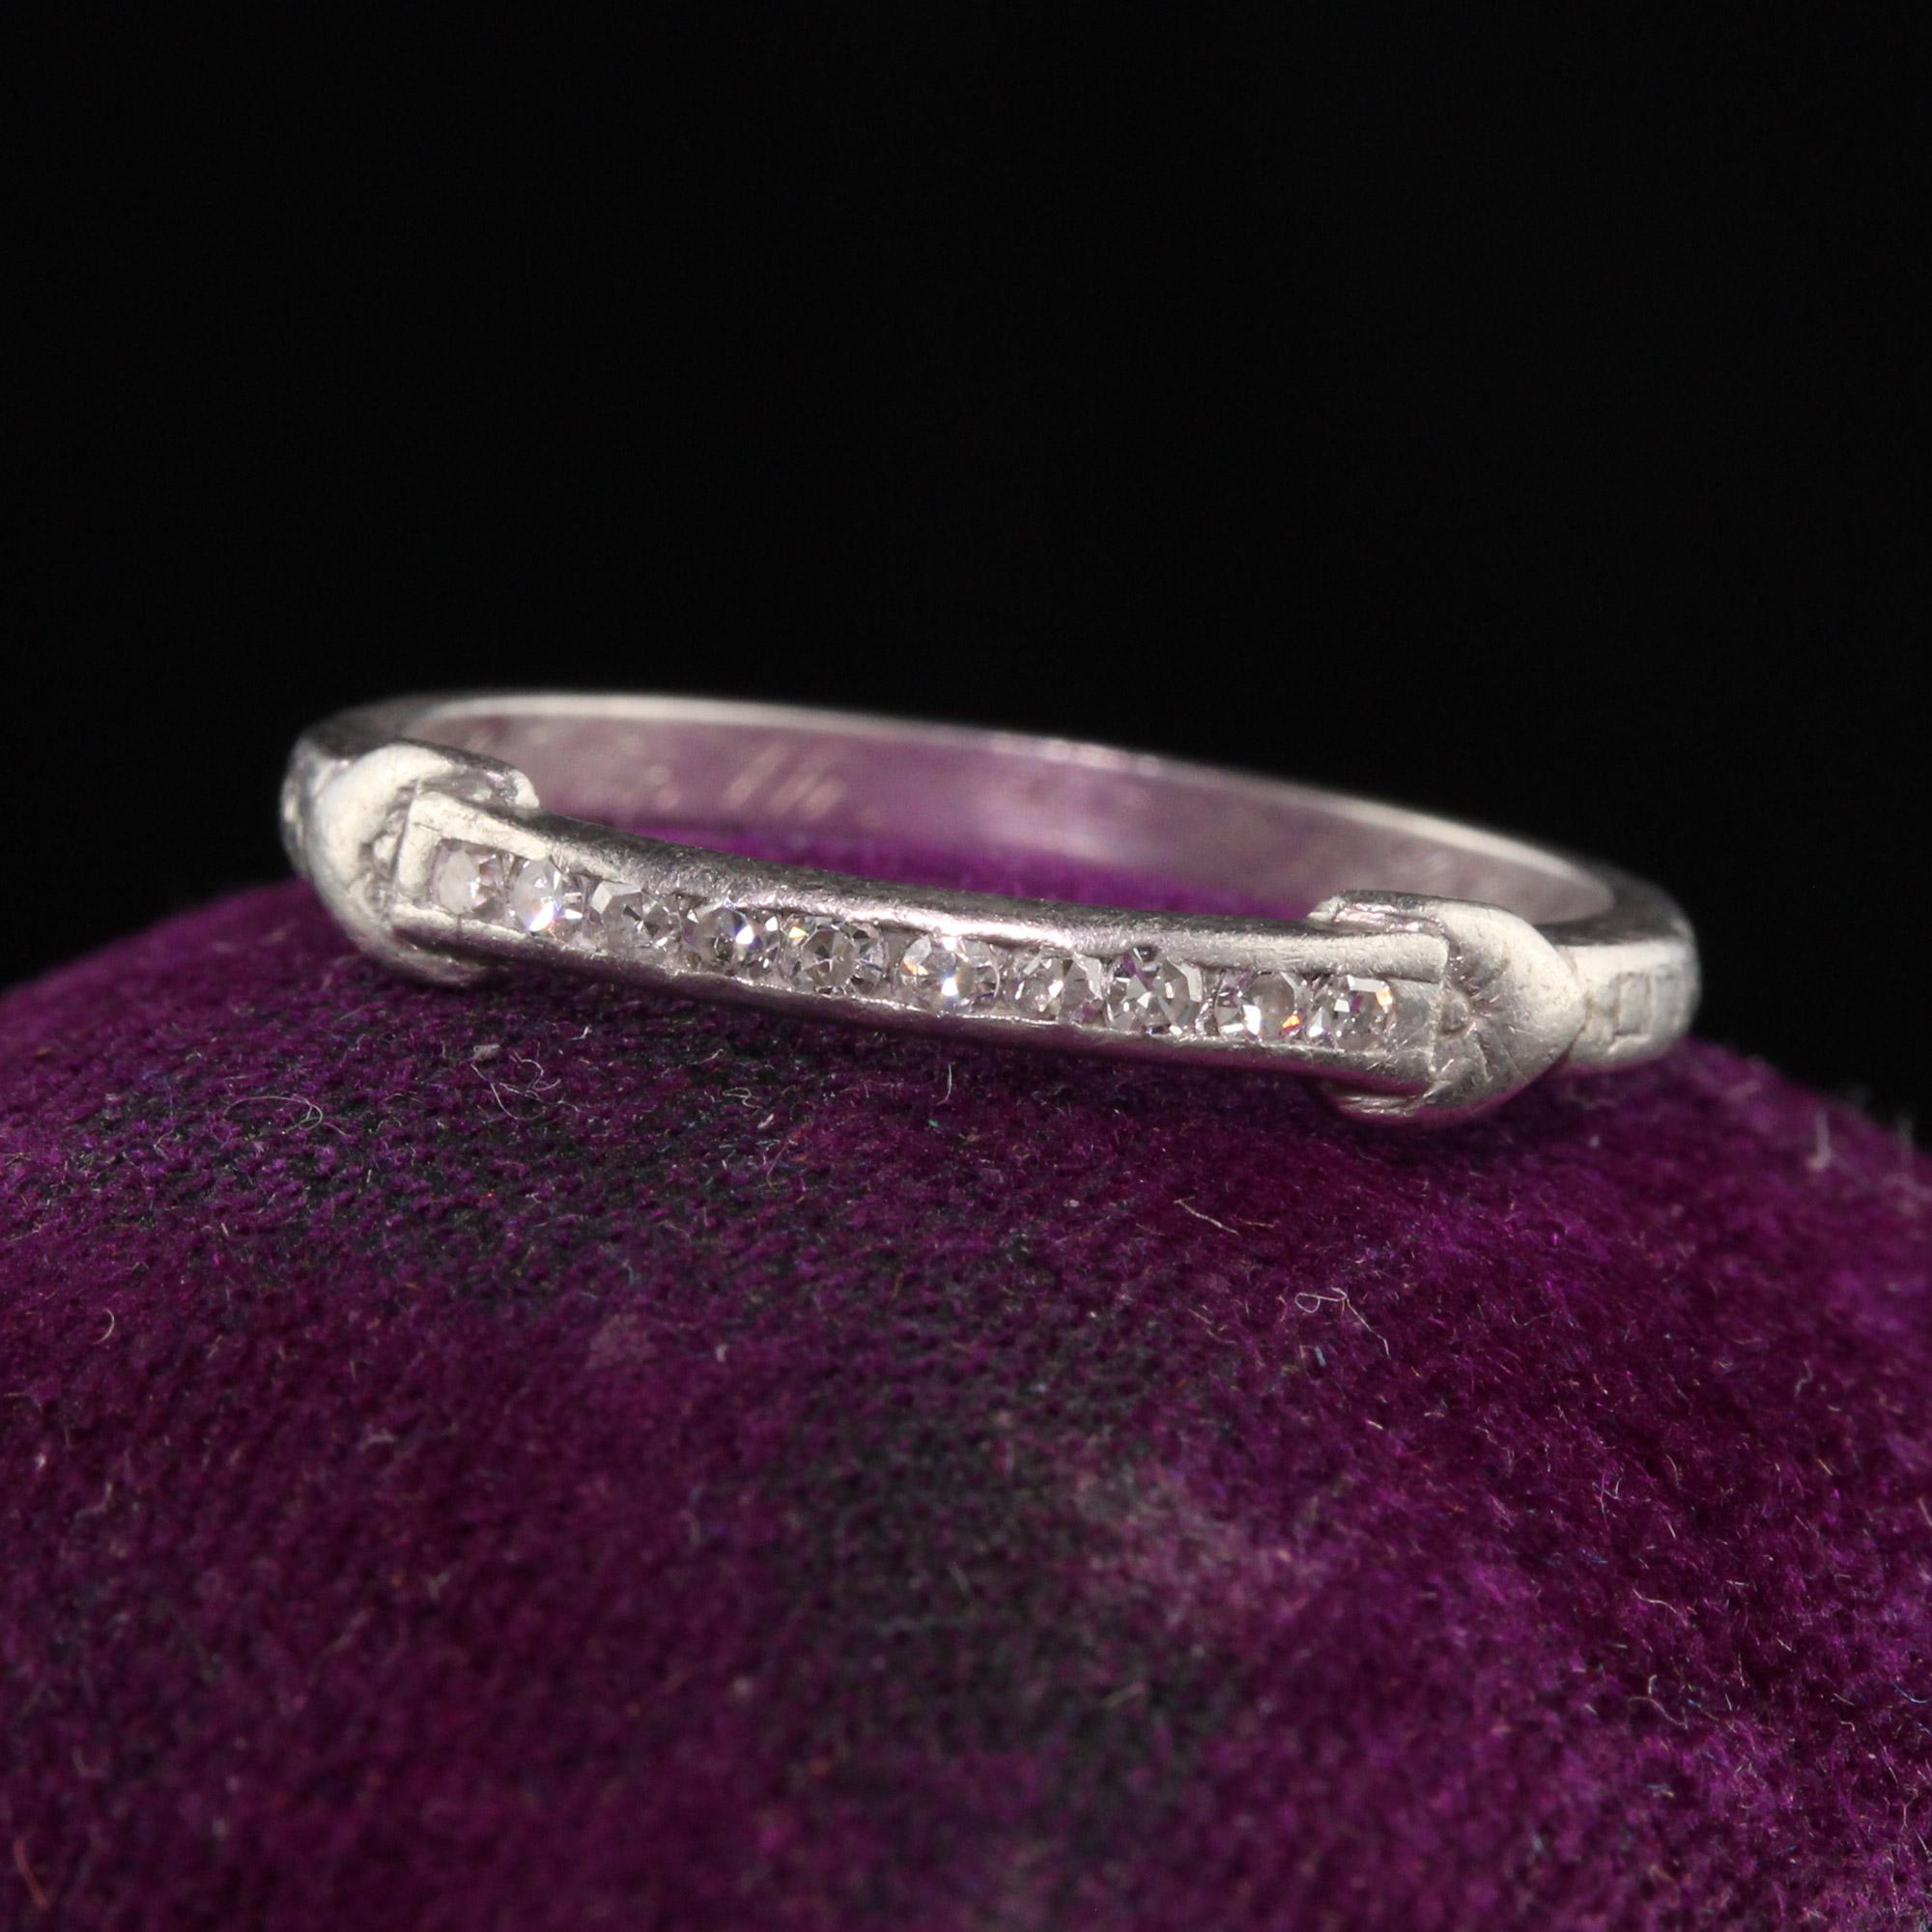 Beautiful Antique Art Deco Platinum Single Cut Diamond Engraved Wedding Band. This gorgeous wedding band has a row of single cut diamonds on the front with a beautiful design on the shank. The inside of the ring is engraved 